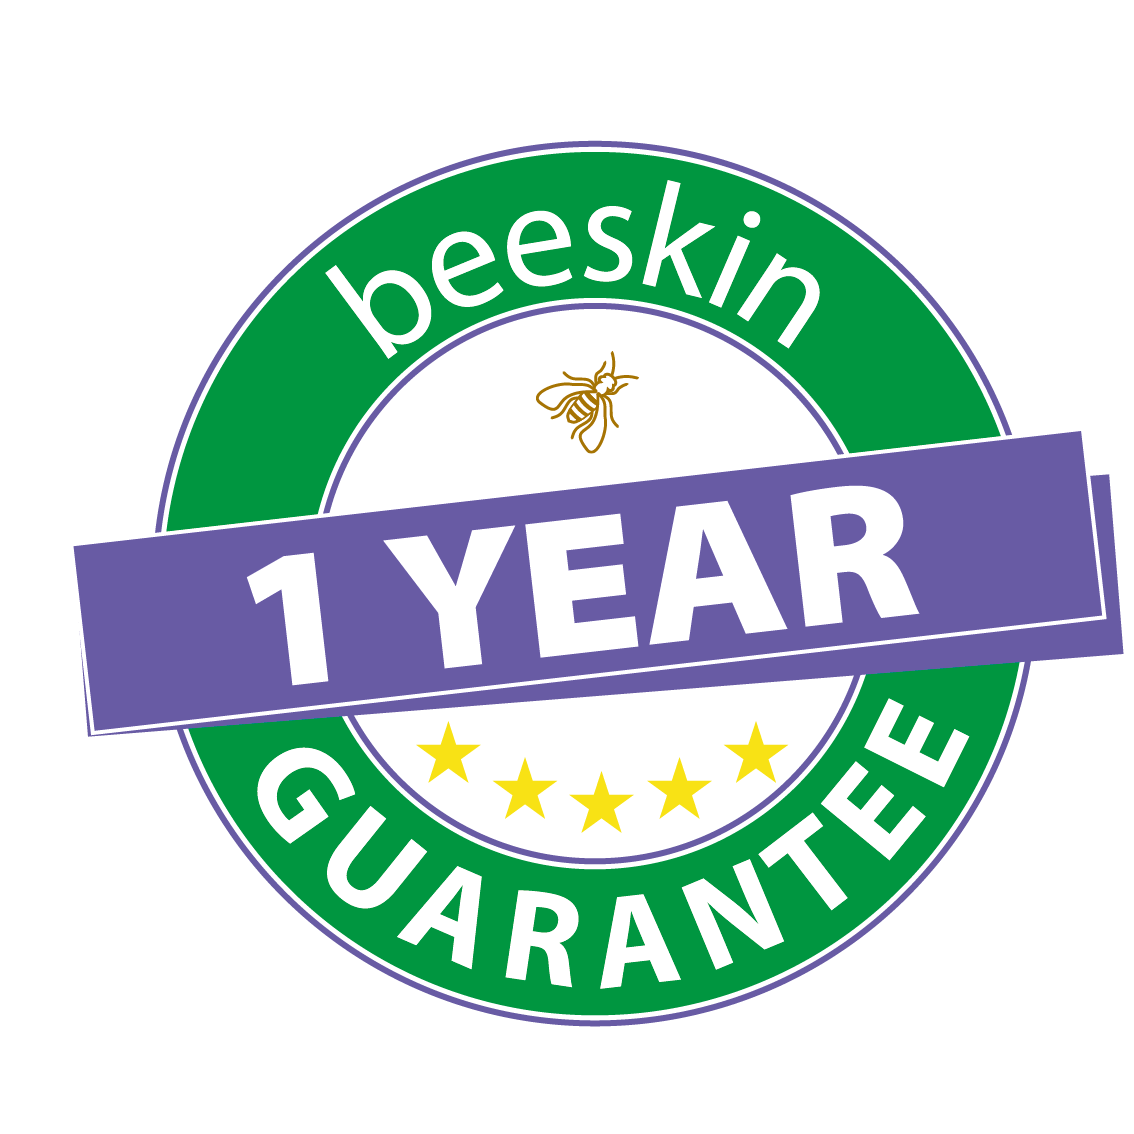 beeskin 1 year guarantee logo. a green circle with 1 year on purple in the middle